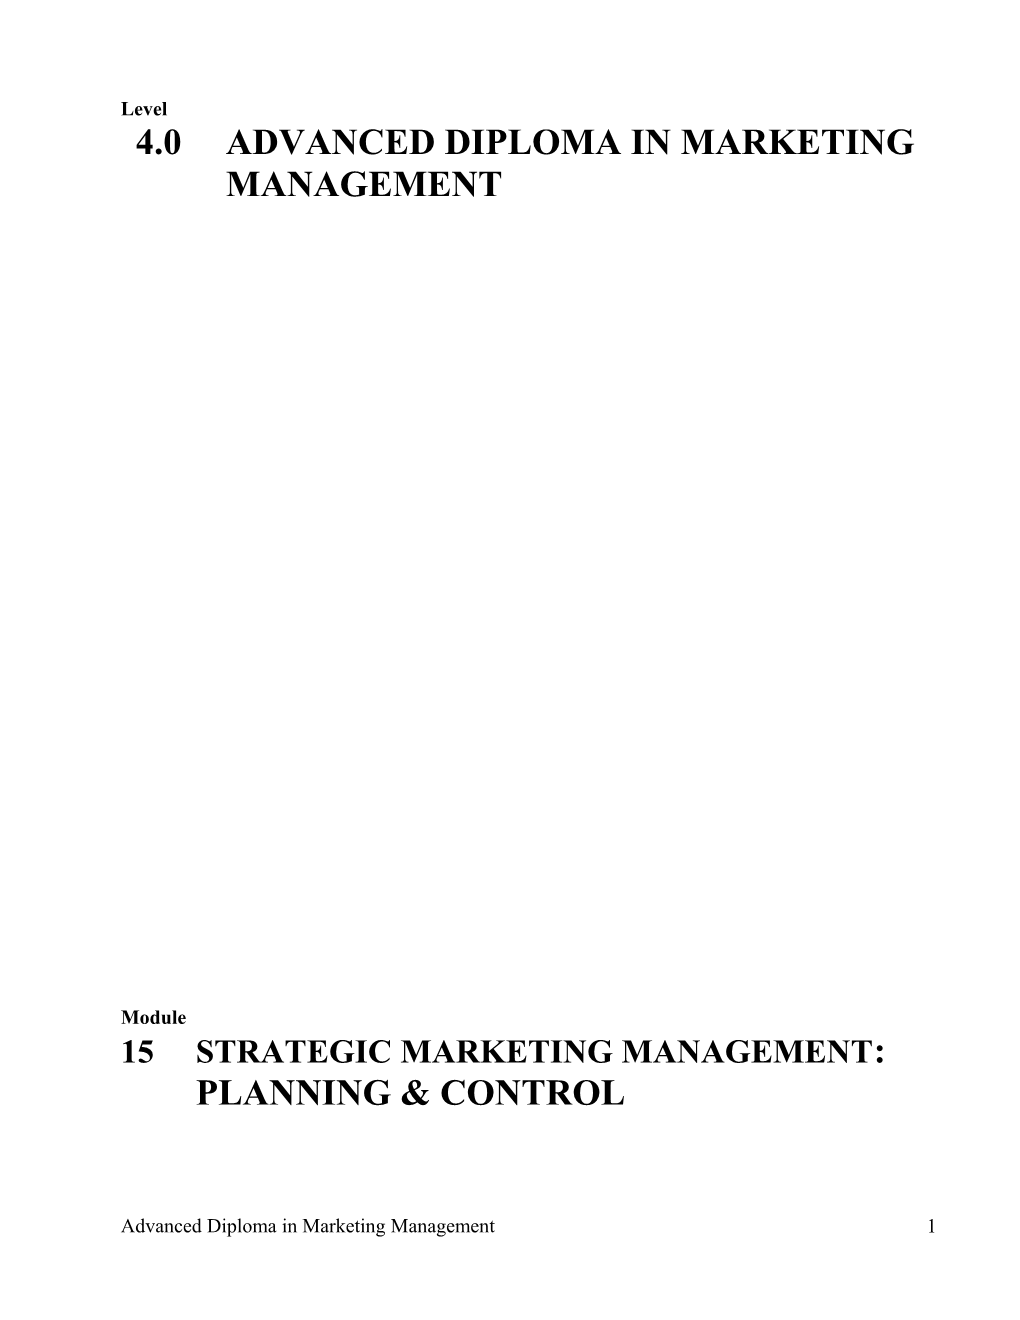 4.0 Advanced Diploma in Marketing Management